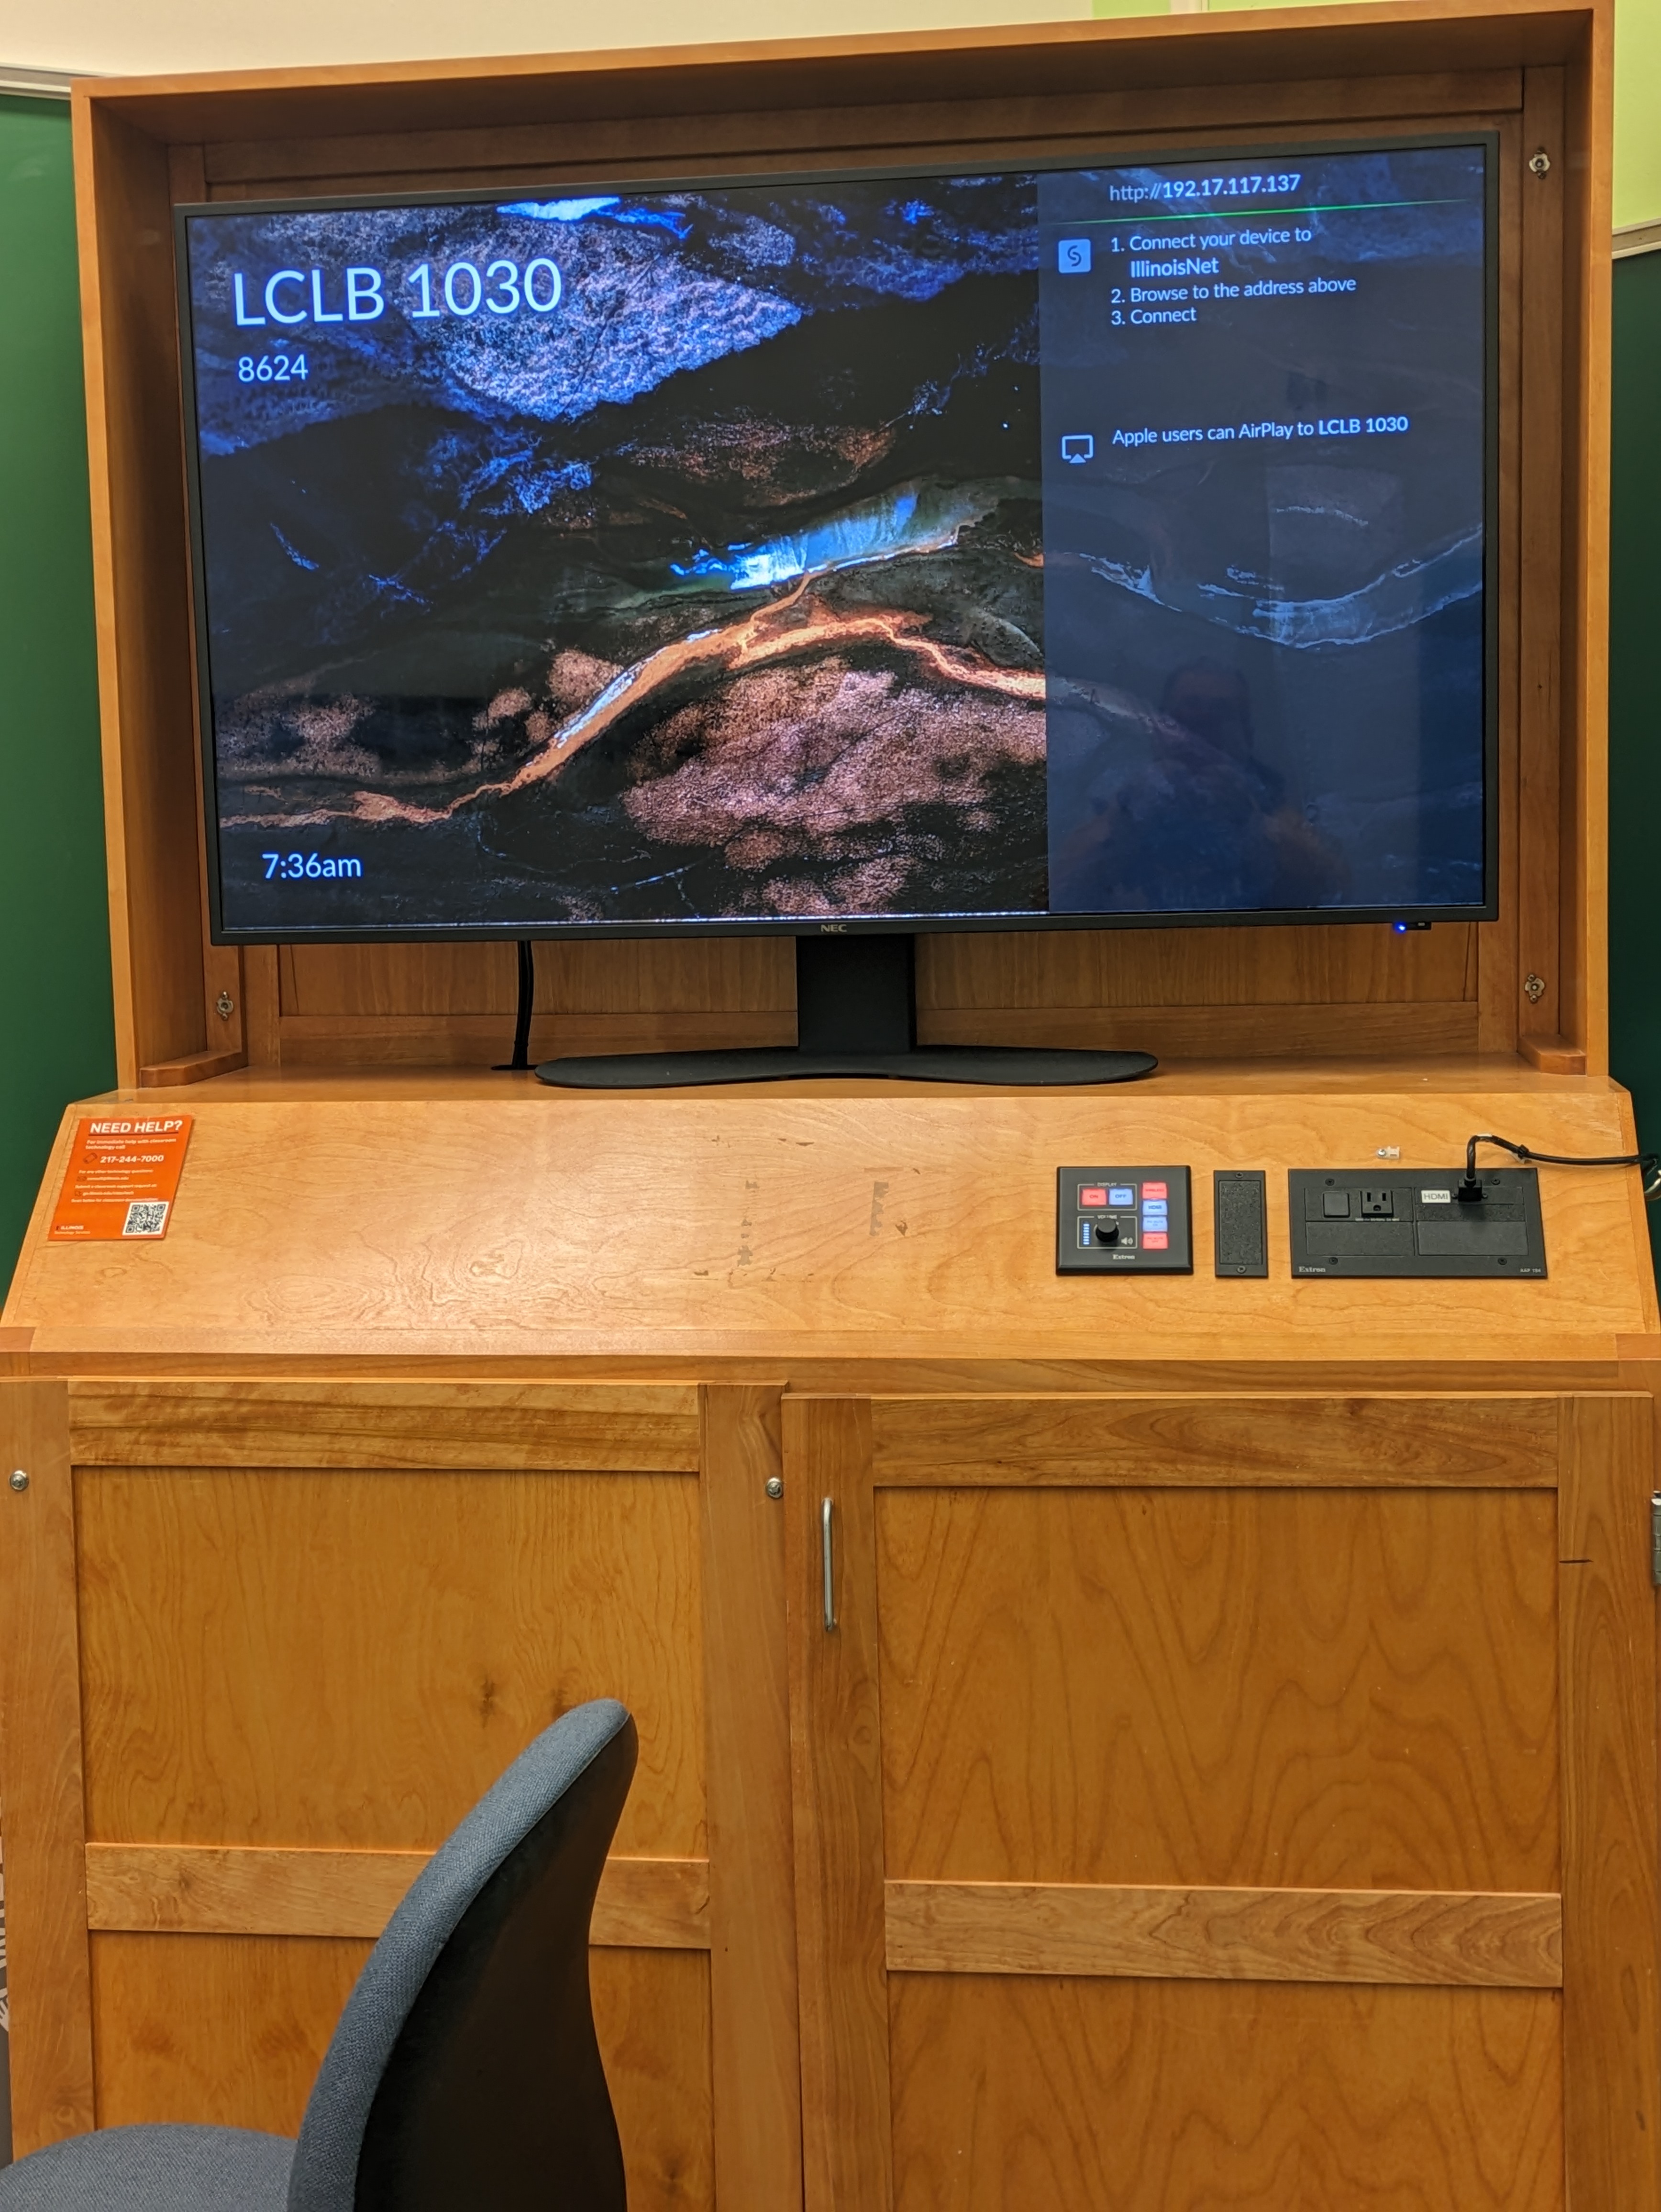 A view of the cabinet with a high definition LCD monitor, wireless input, and a push button controller